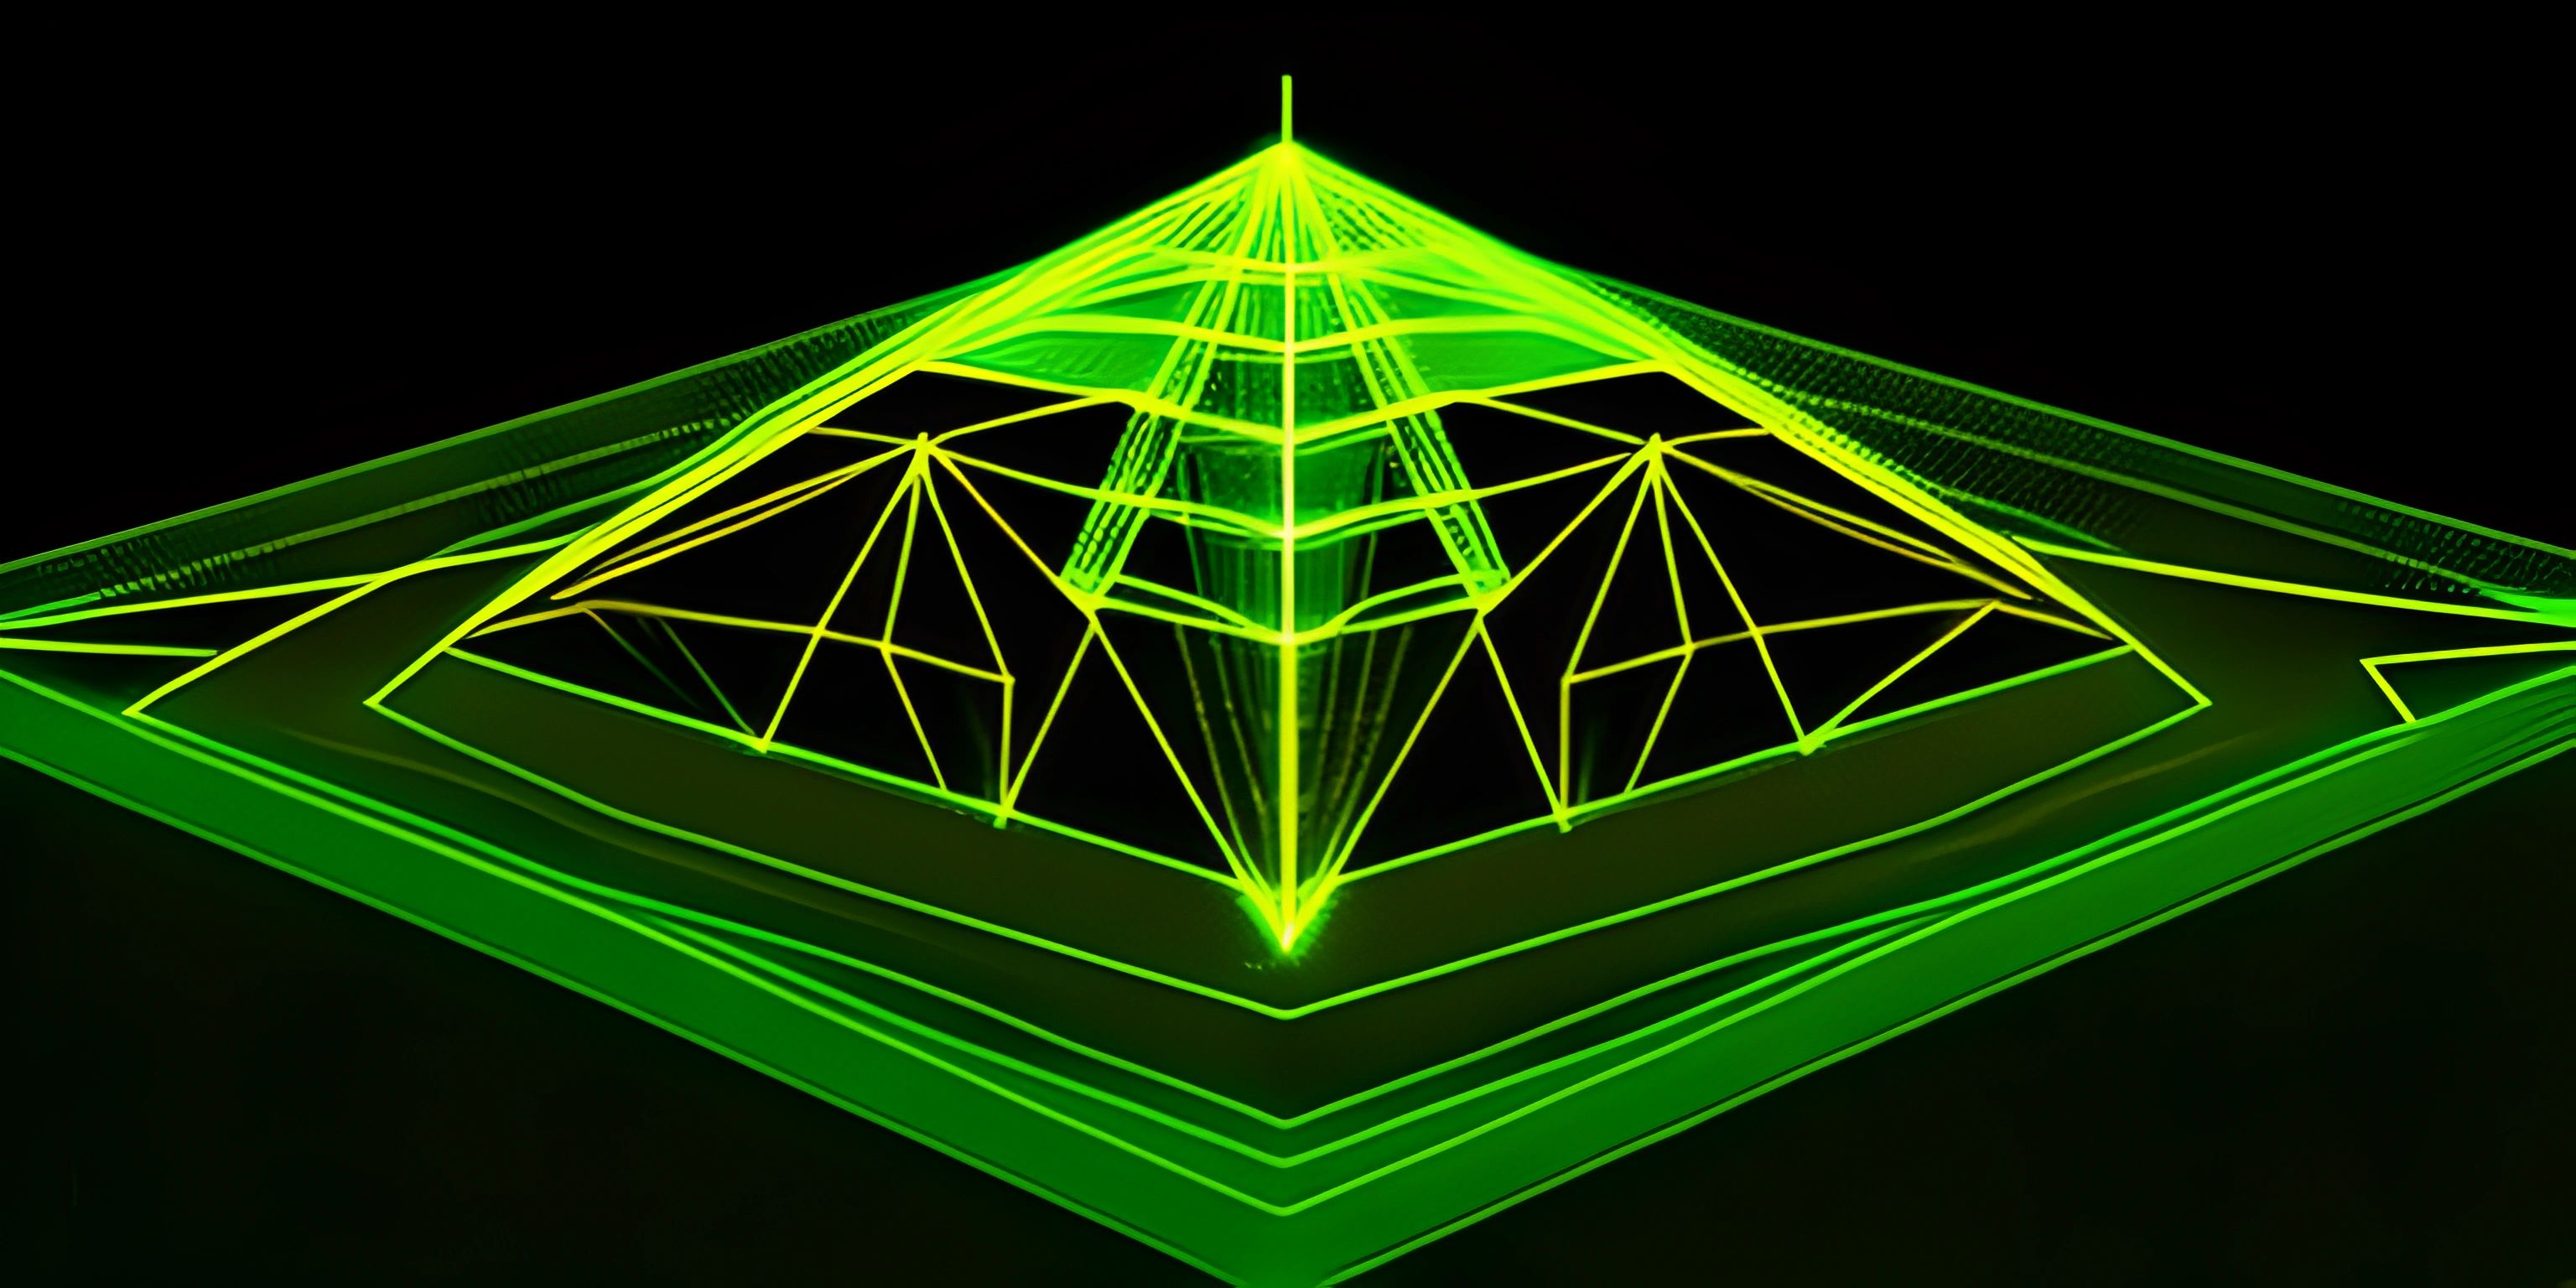 3d rendering of an electric structure against a dark background with a blue glow in the center